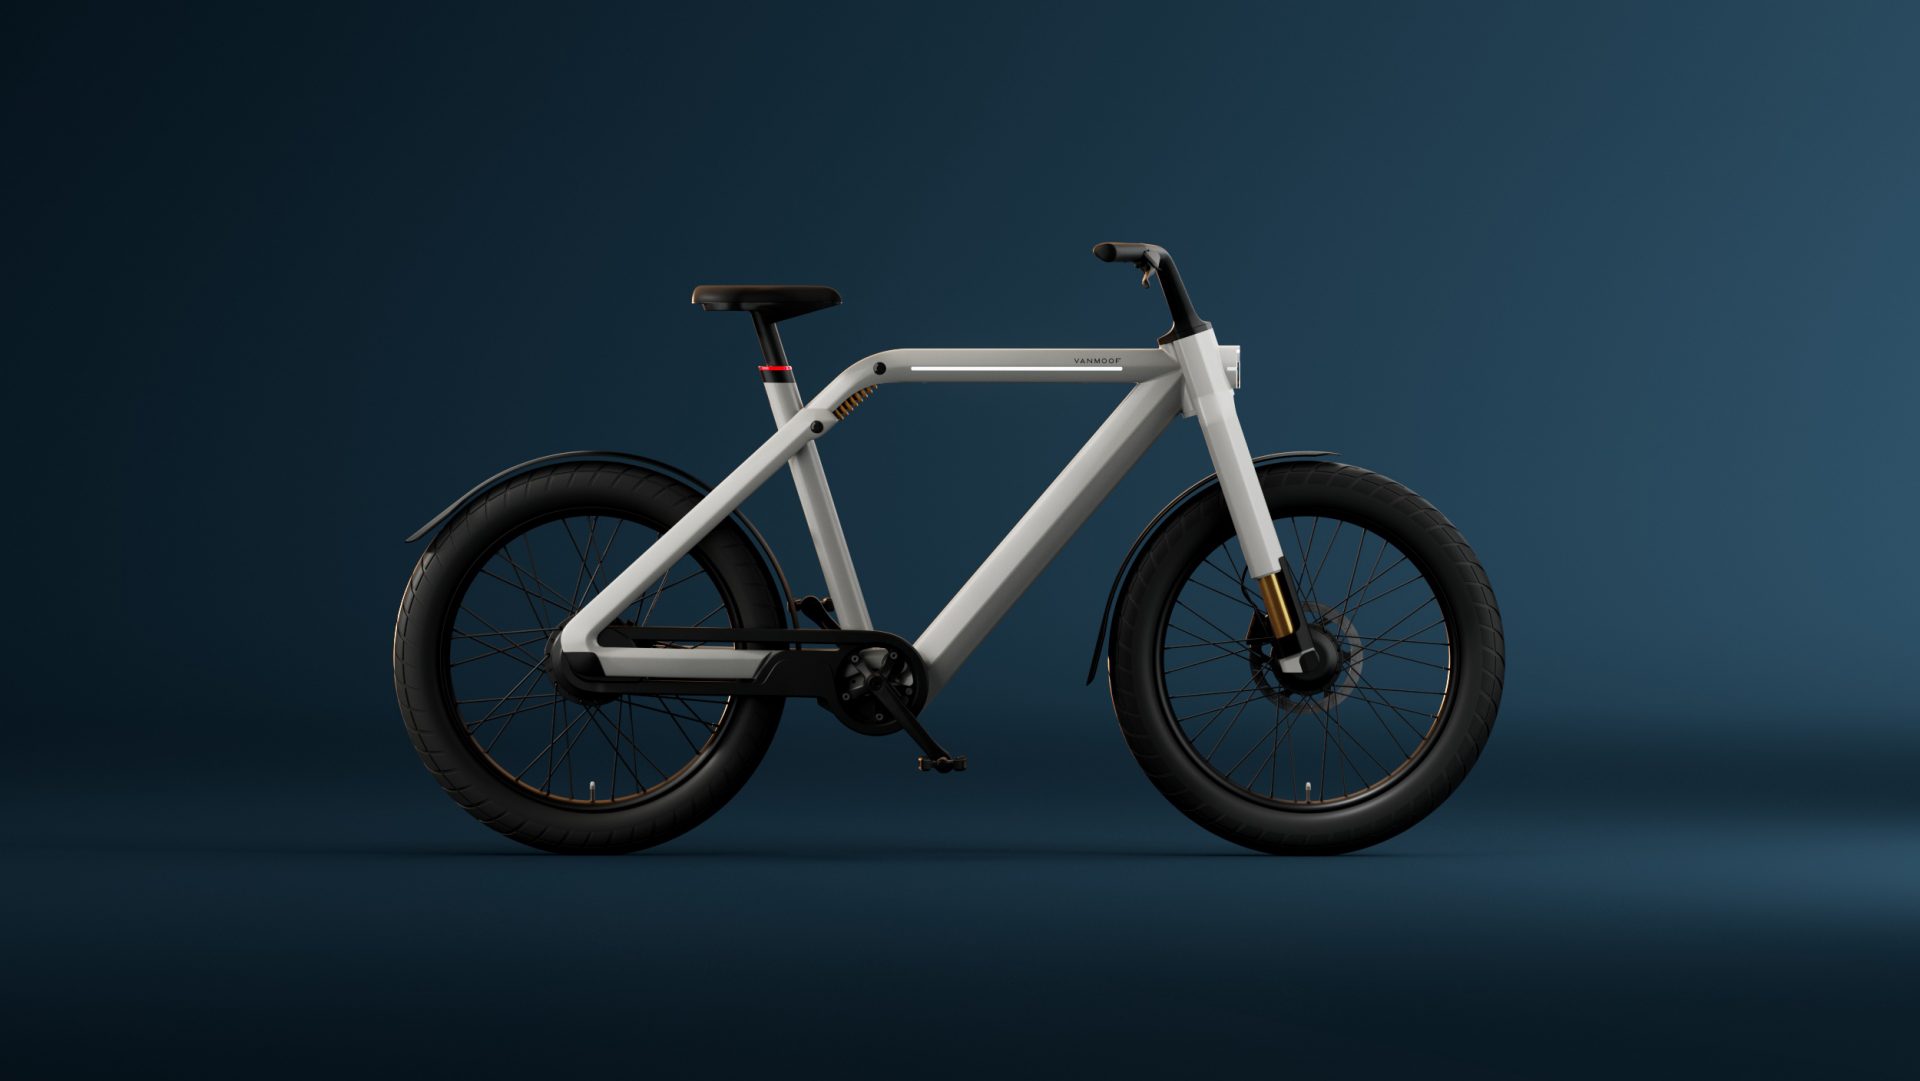 VanMoof’s quickest e-bike yet tops out at 31 MPH